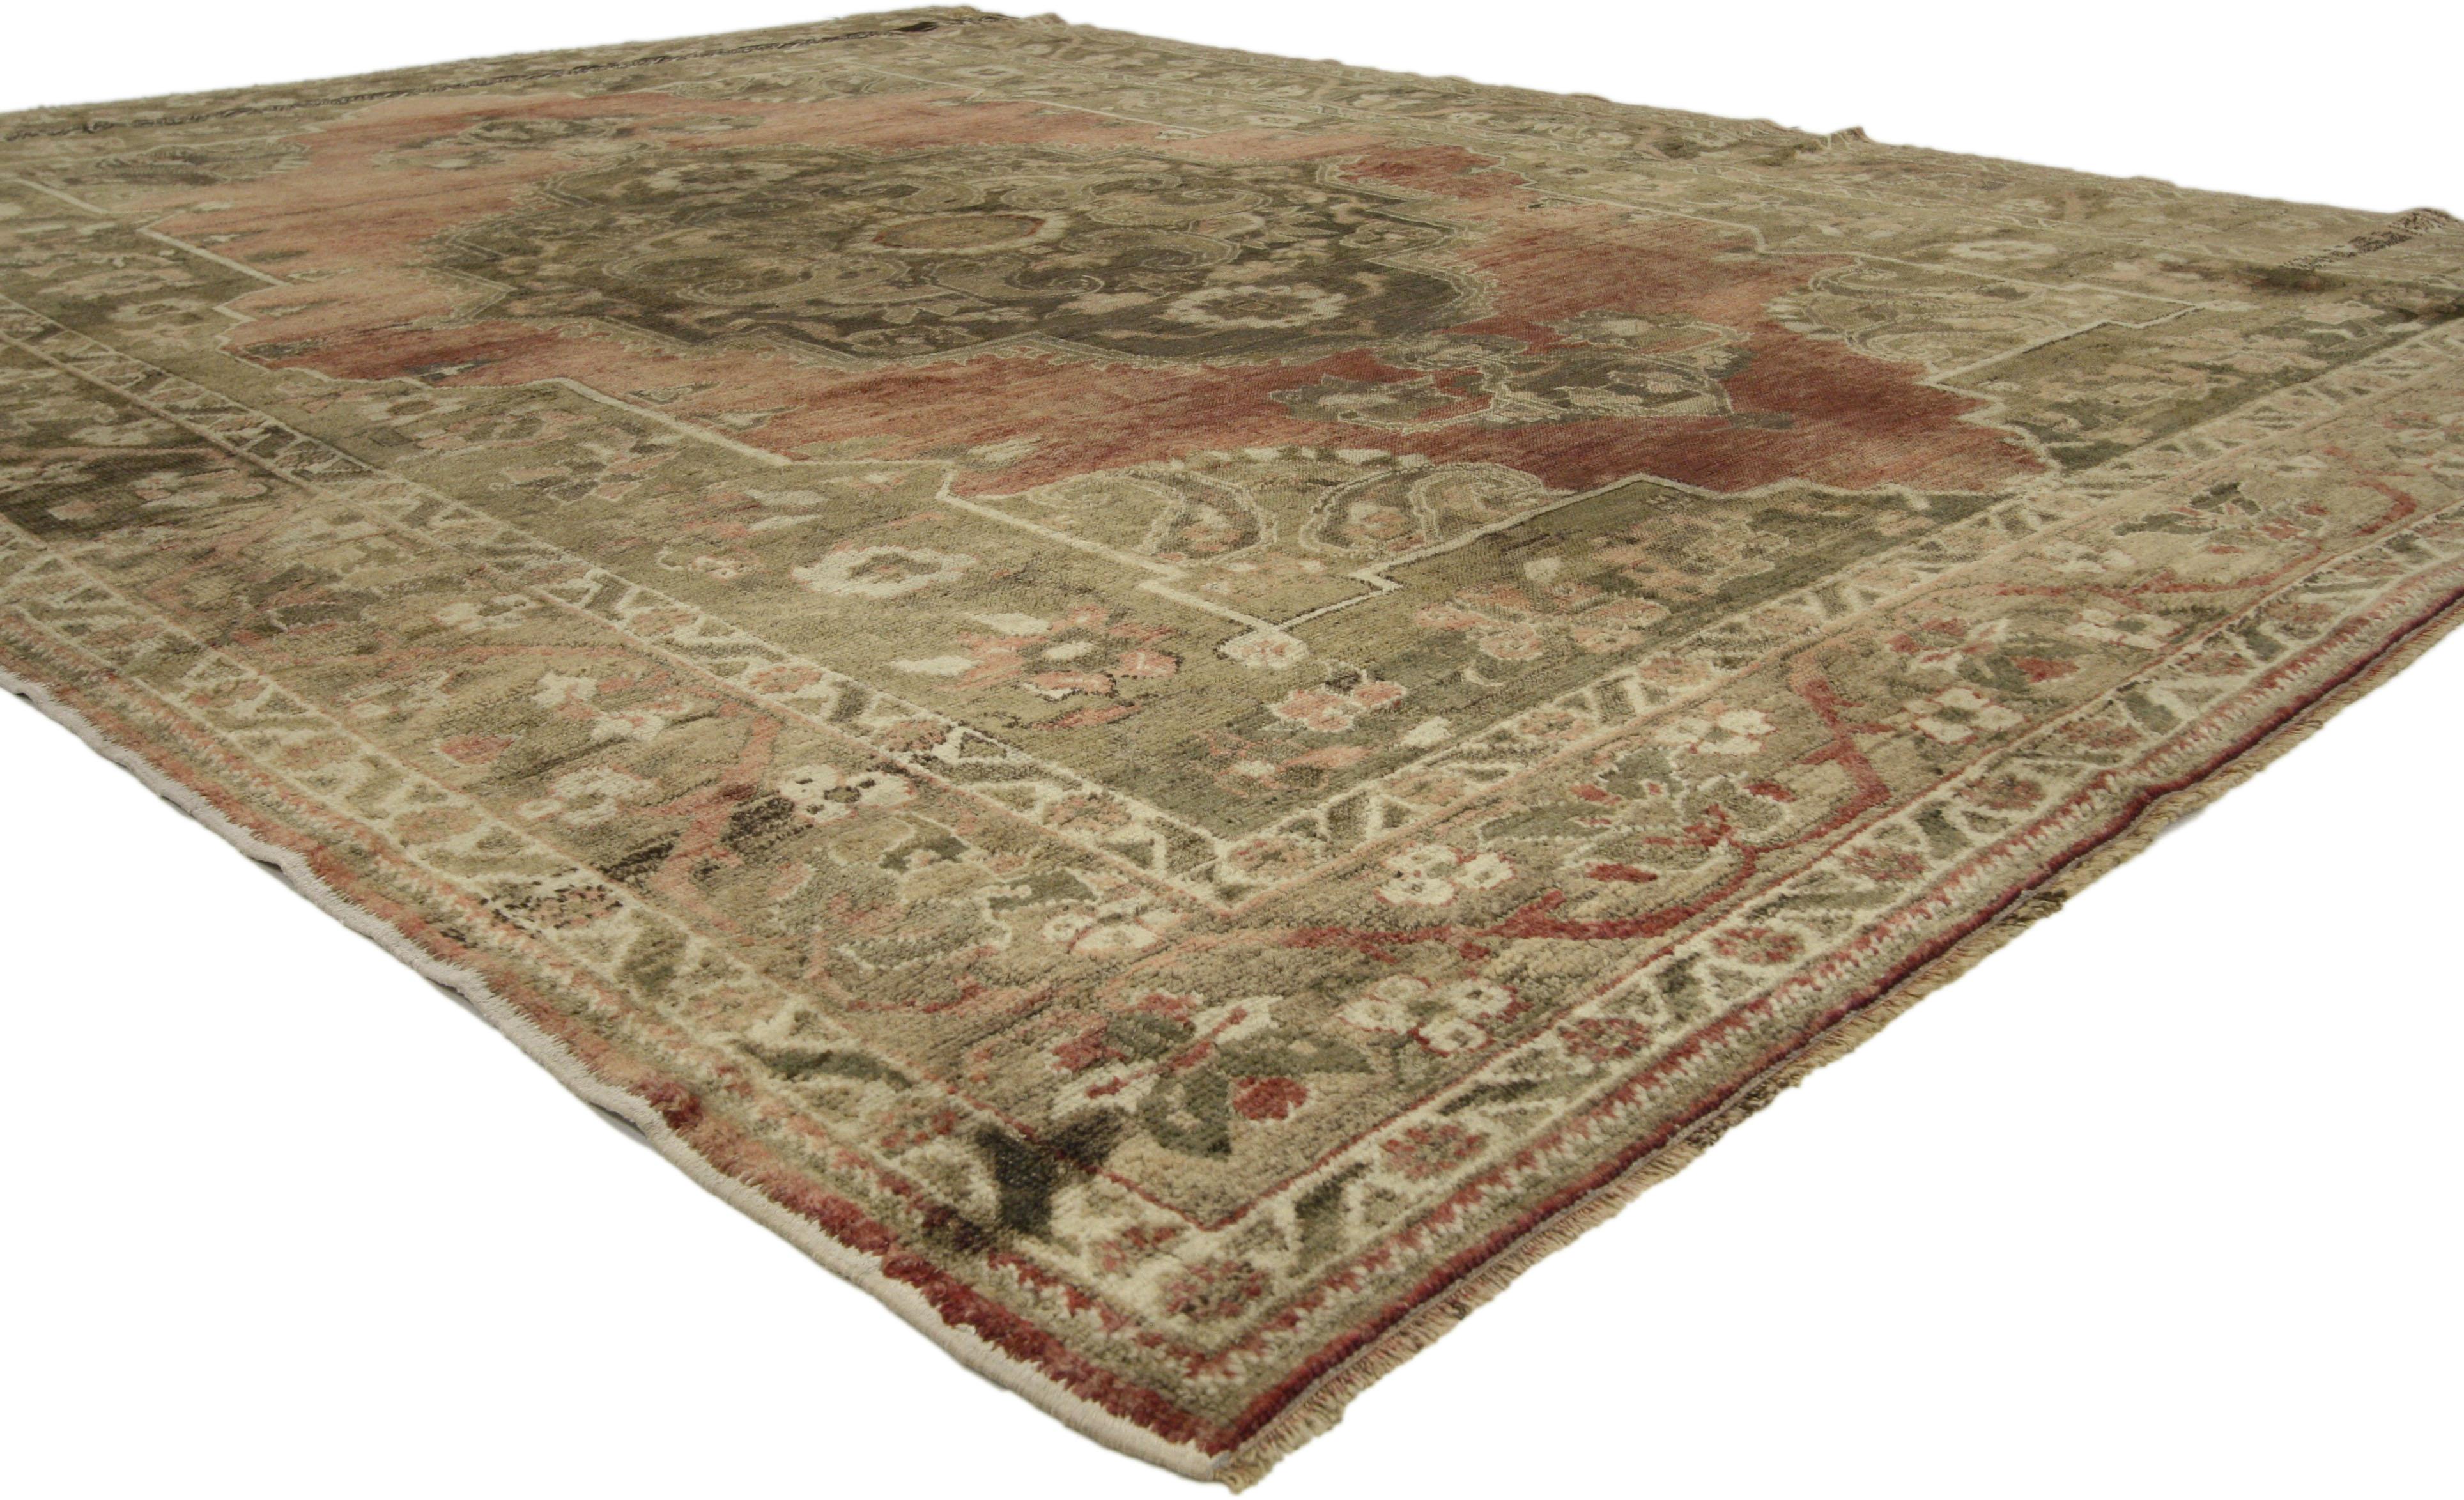 50934, antique Turkish Oushak rug with warm rustic Artisan style. This hand knotted wool vintage Turkish Oushak rug embodies a rustic Artisan style. Immersed in Anatolian history and warm colors, this vintage Oushak rug features a center medallion